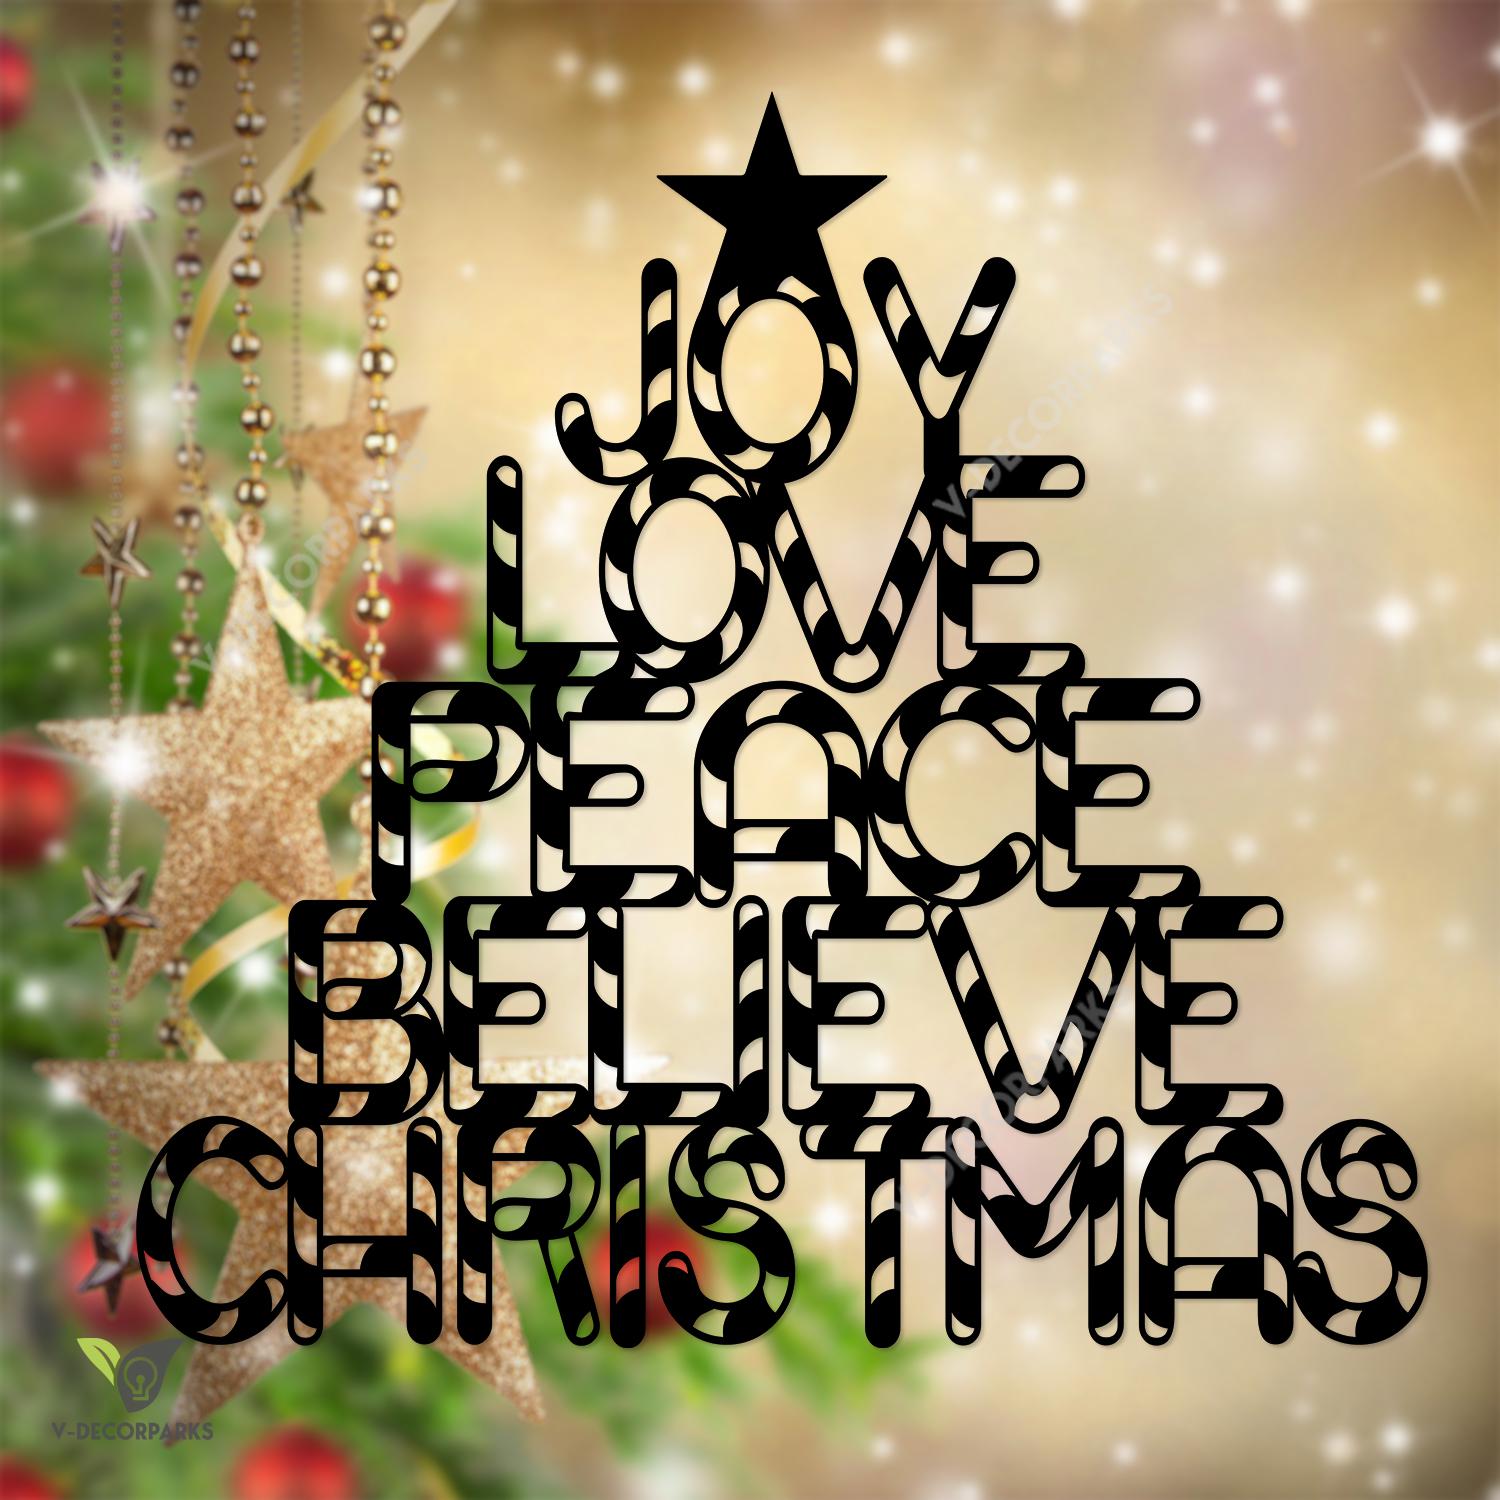 Joy Love Peace Believe Christmas Metal Art, Christmas Tree Stainless Accent Metal Sign